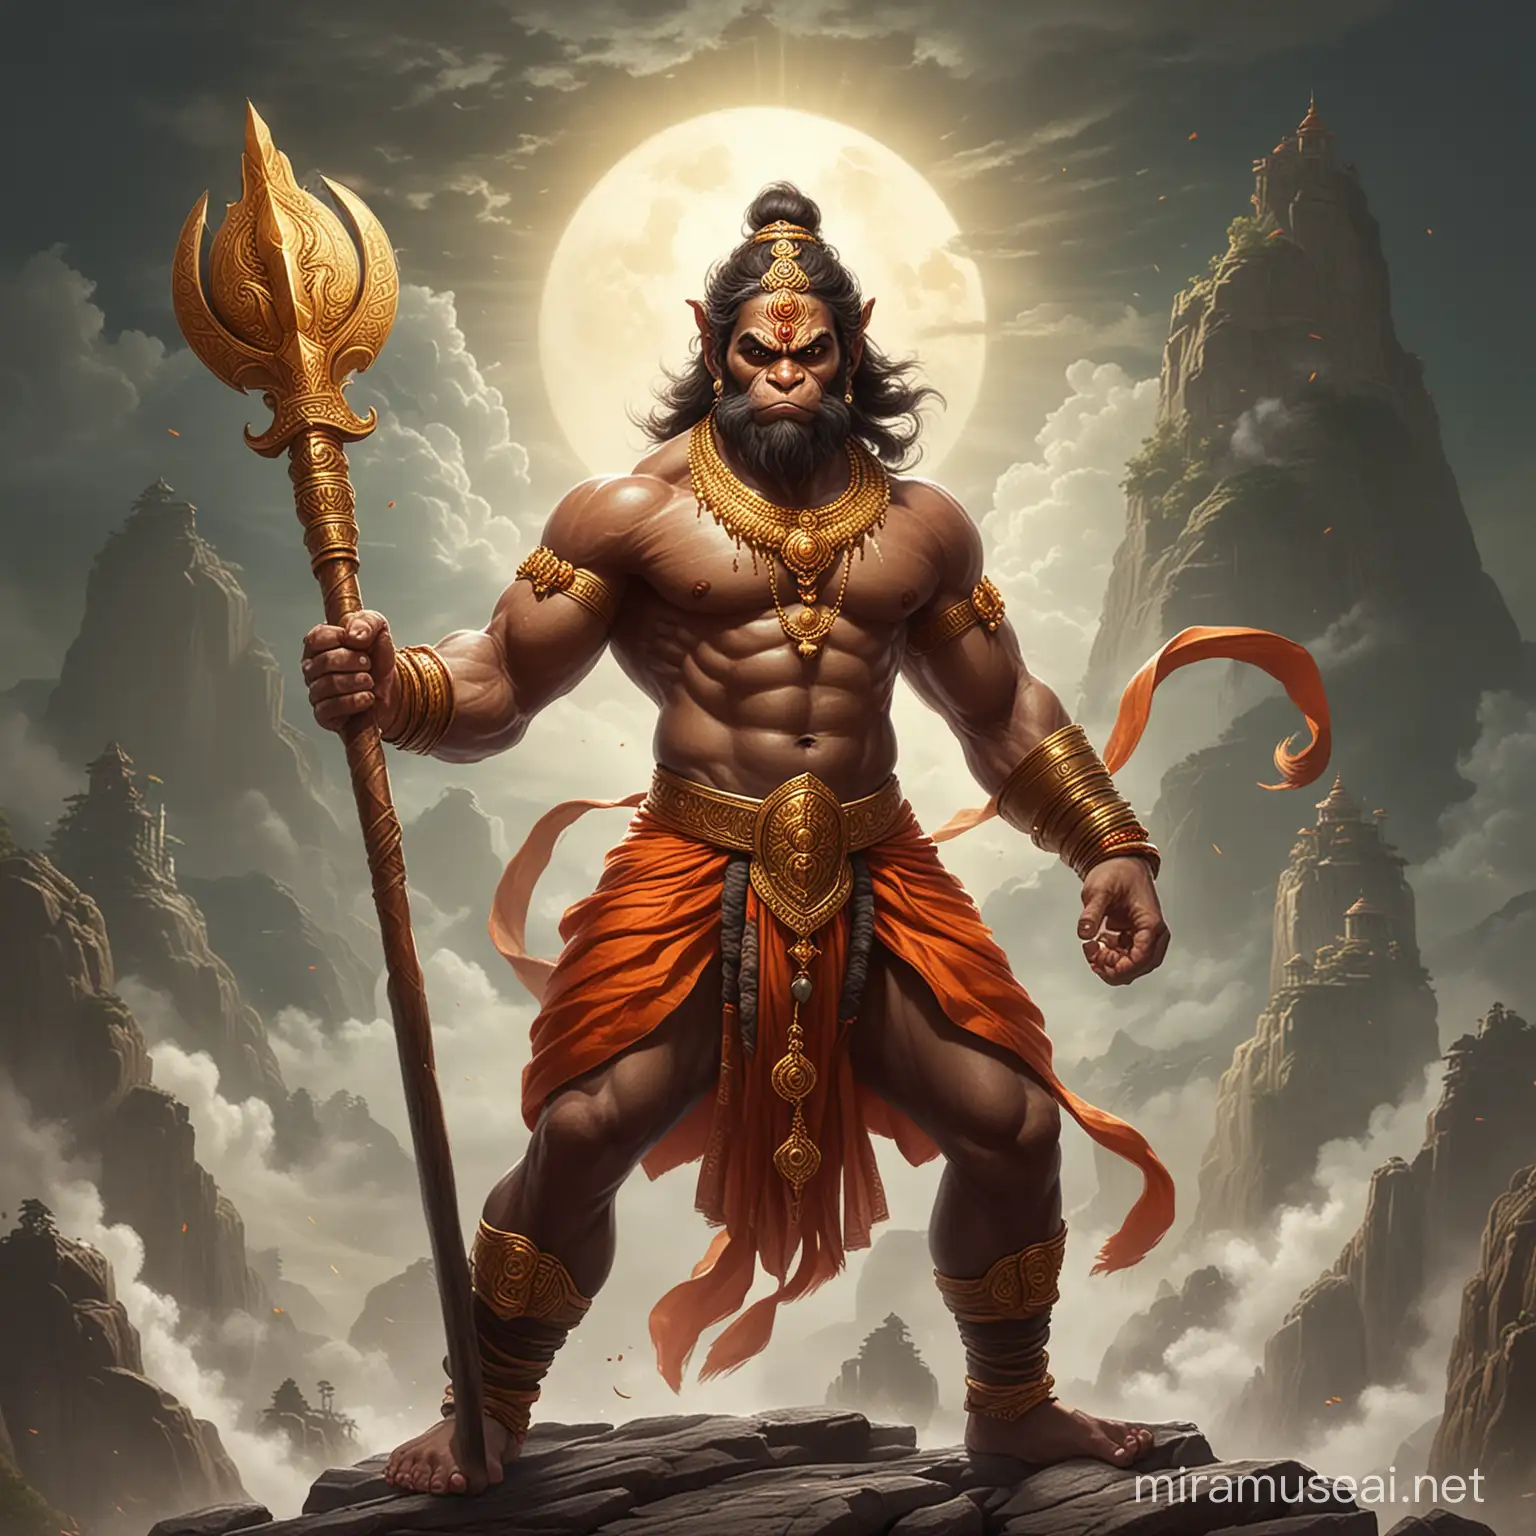 "Craft an evocative digital portrayal of Lord Hanuman, the revered Hindu deity, with his mighty gada (mace) in hand. Infuse the illustration with the essence of his immense strength, unwavering devotion, and divine grace. Let Hanuman's presence radiate with the symbolism and reverence attributed to him in Hindu mythology, emphasizing the significance of the long gada as a symbol of his power and protection."